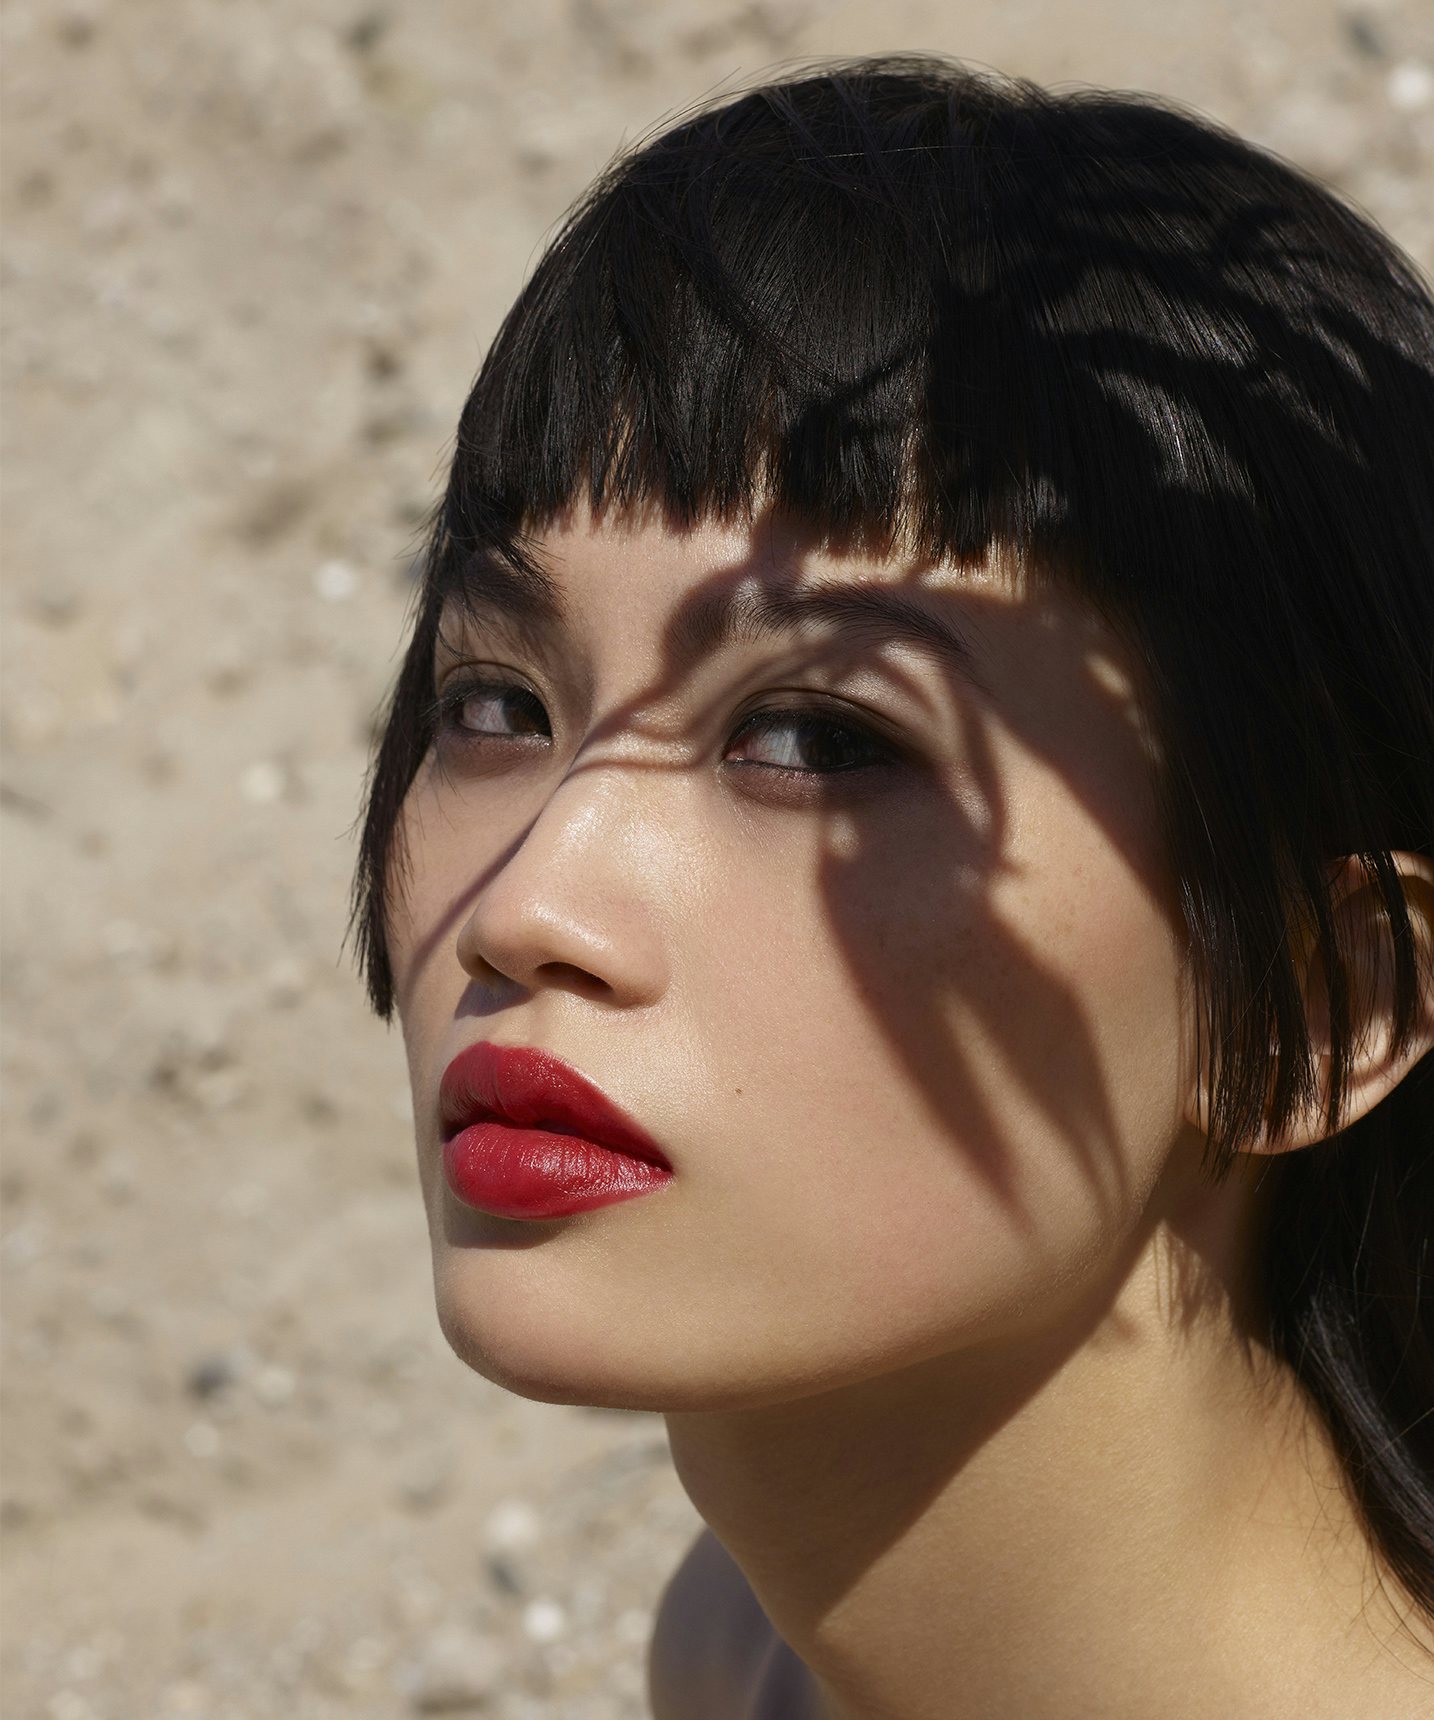 La bouche rouge Viviane Sassen campaign asian model wearing red lipstick with the shadow of a leaf on her face